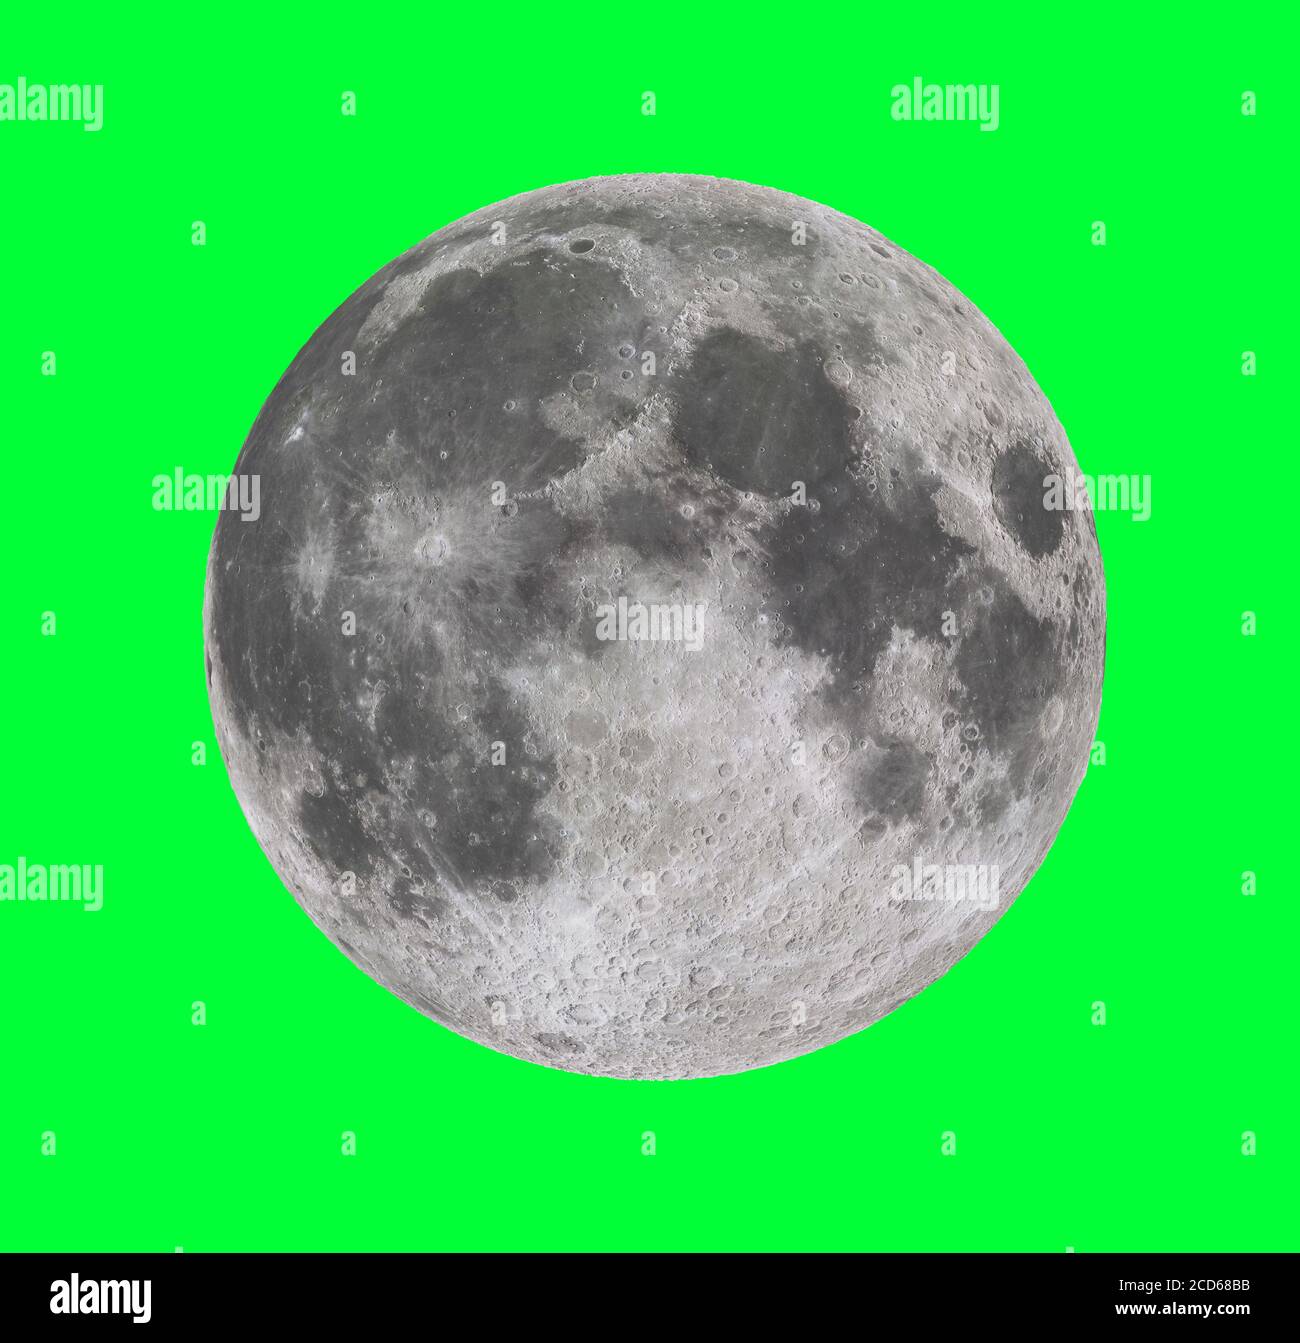 Breathtaking Moon background green screen for your romantic videos